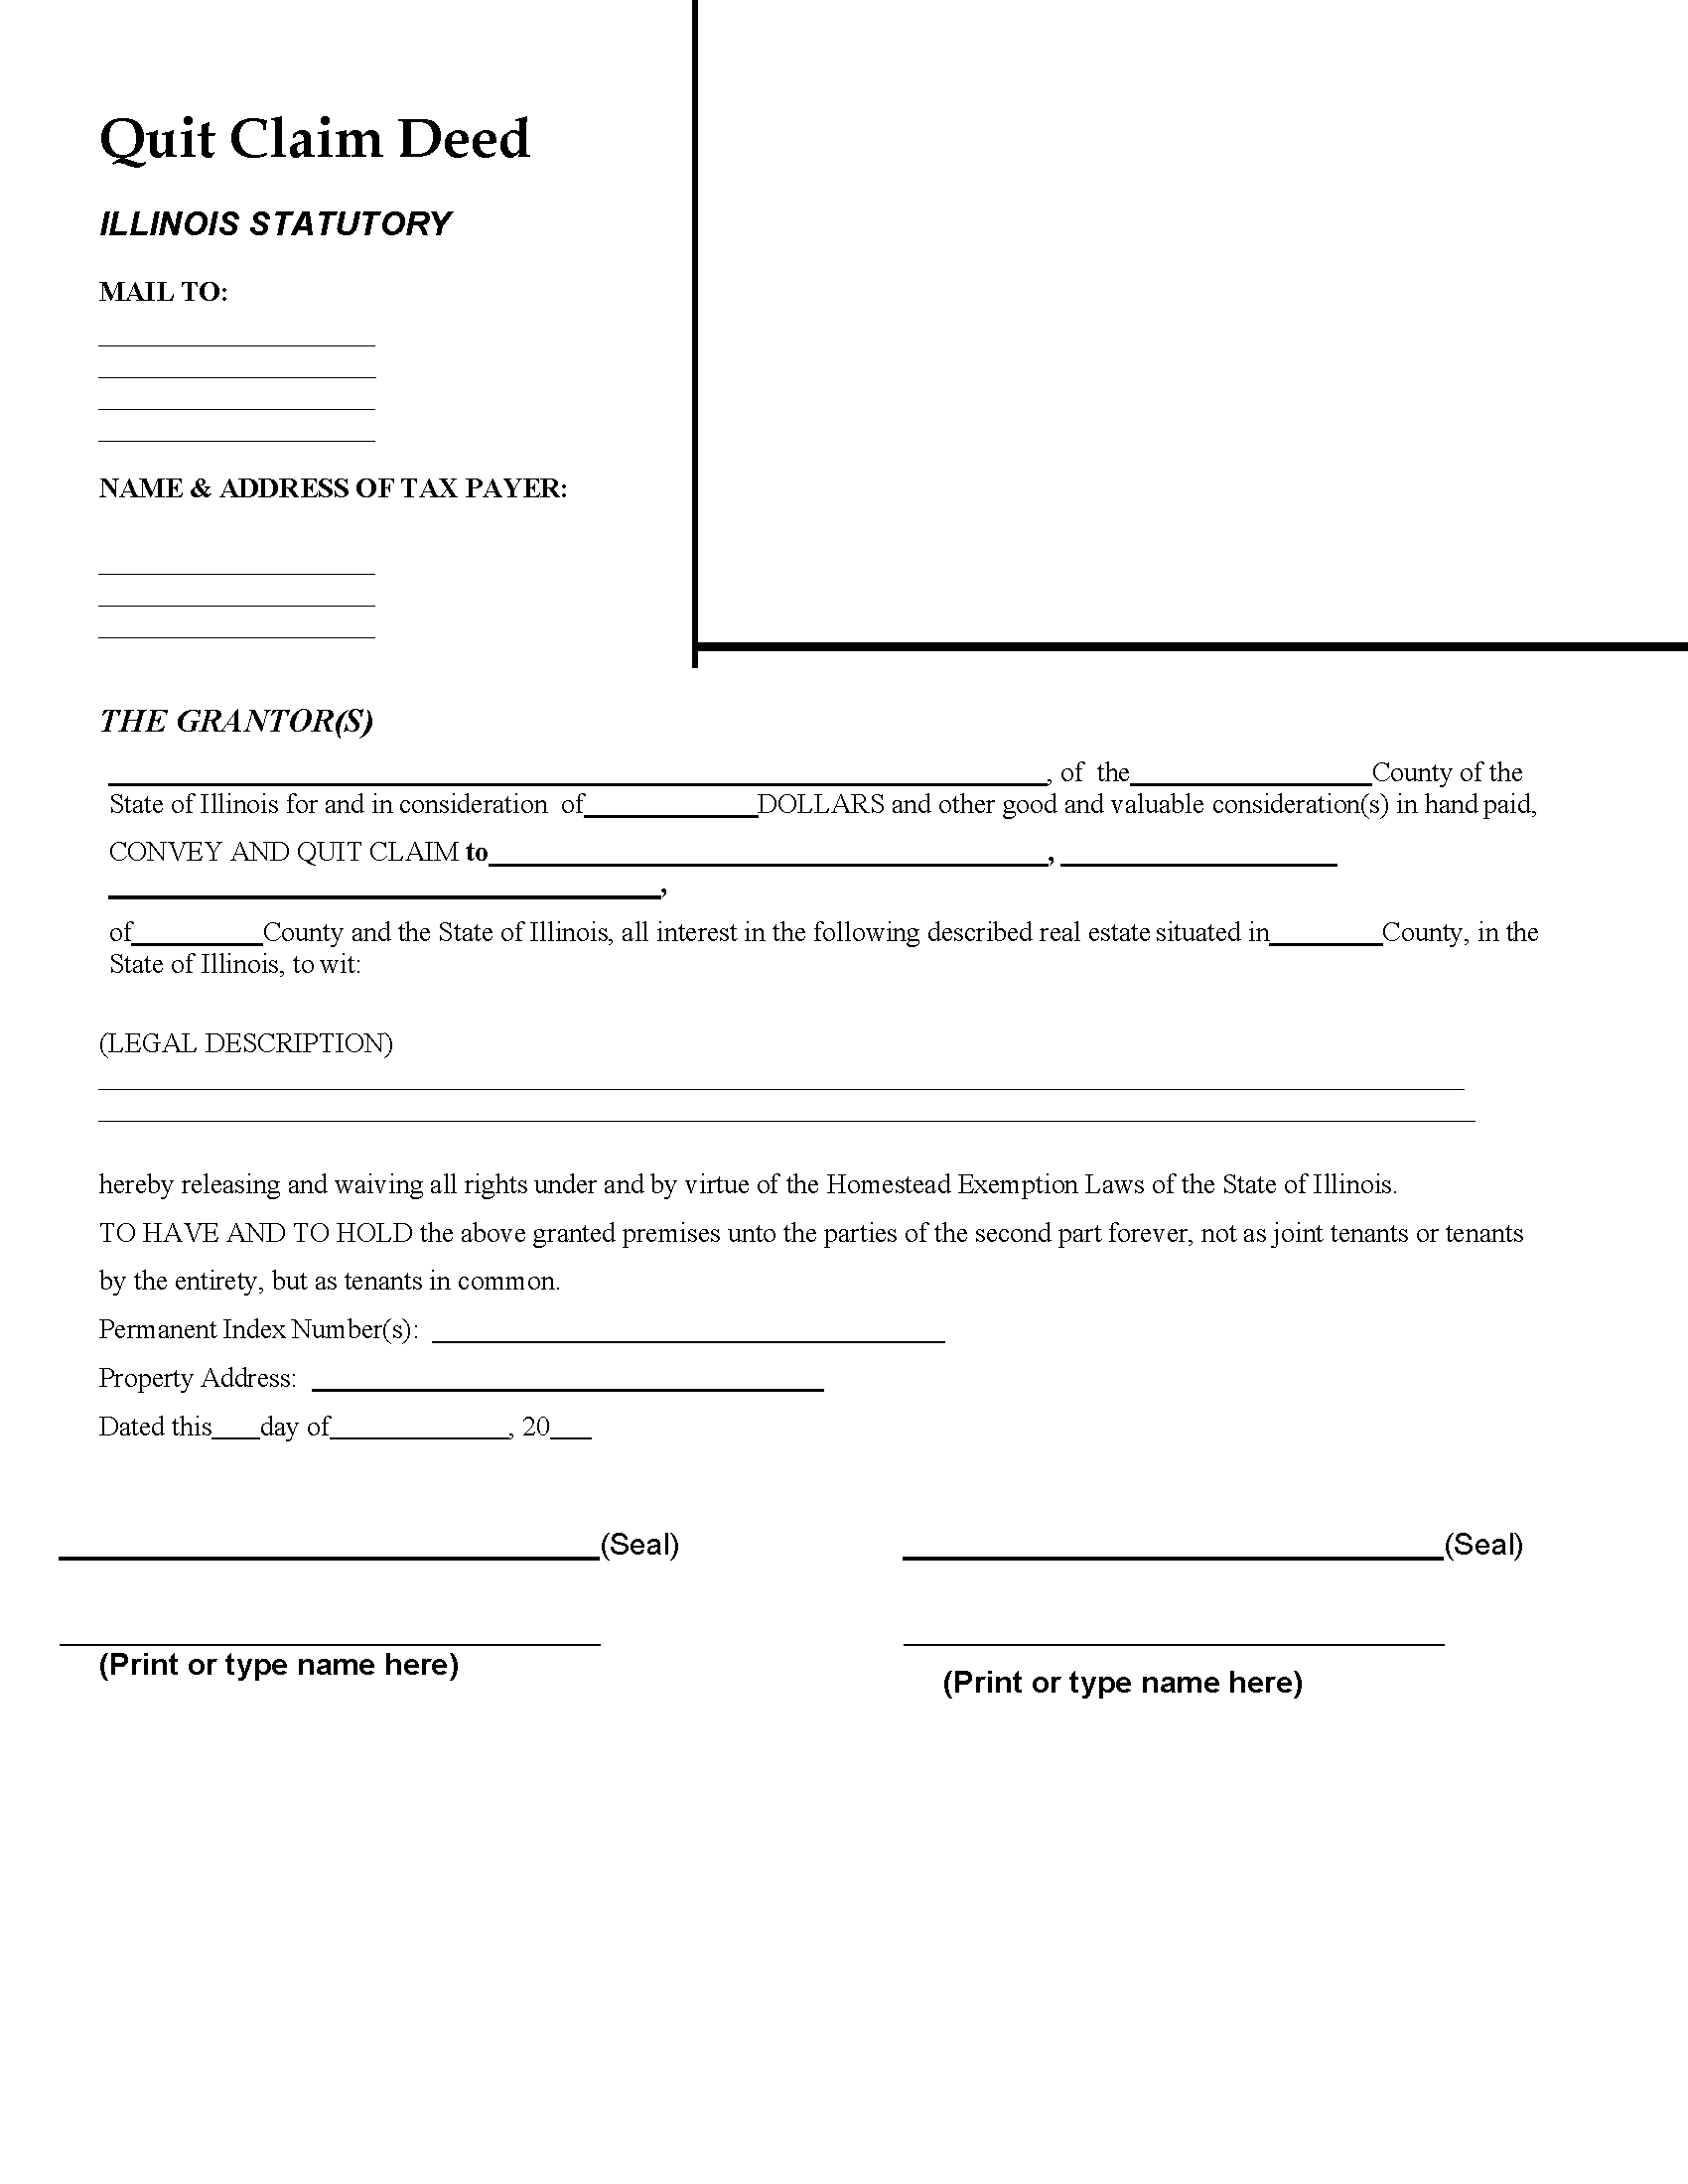 illinois-quit-claim-deed-free-printable-legal-forms